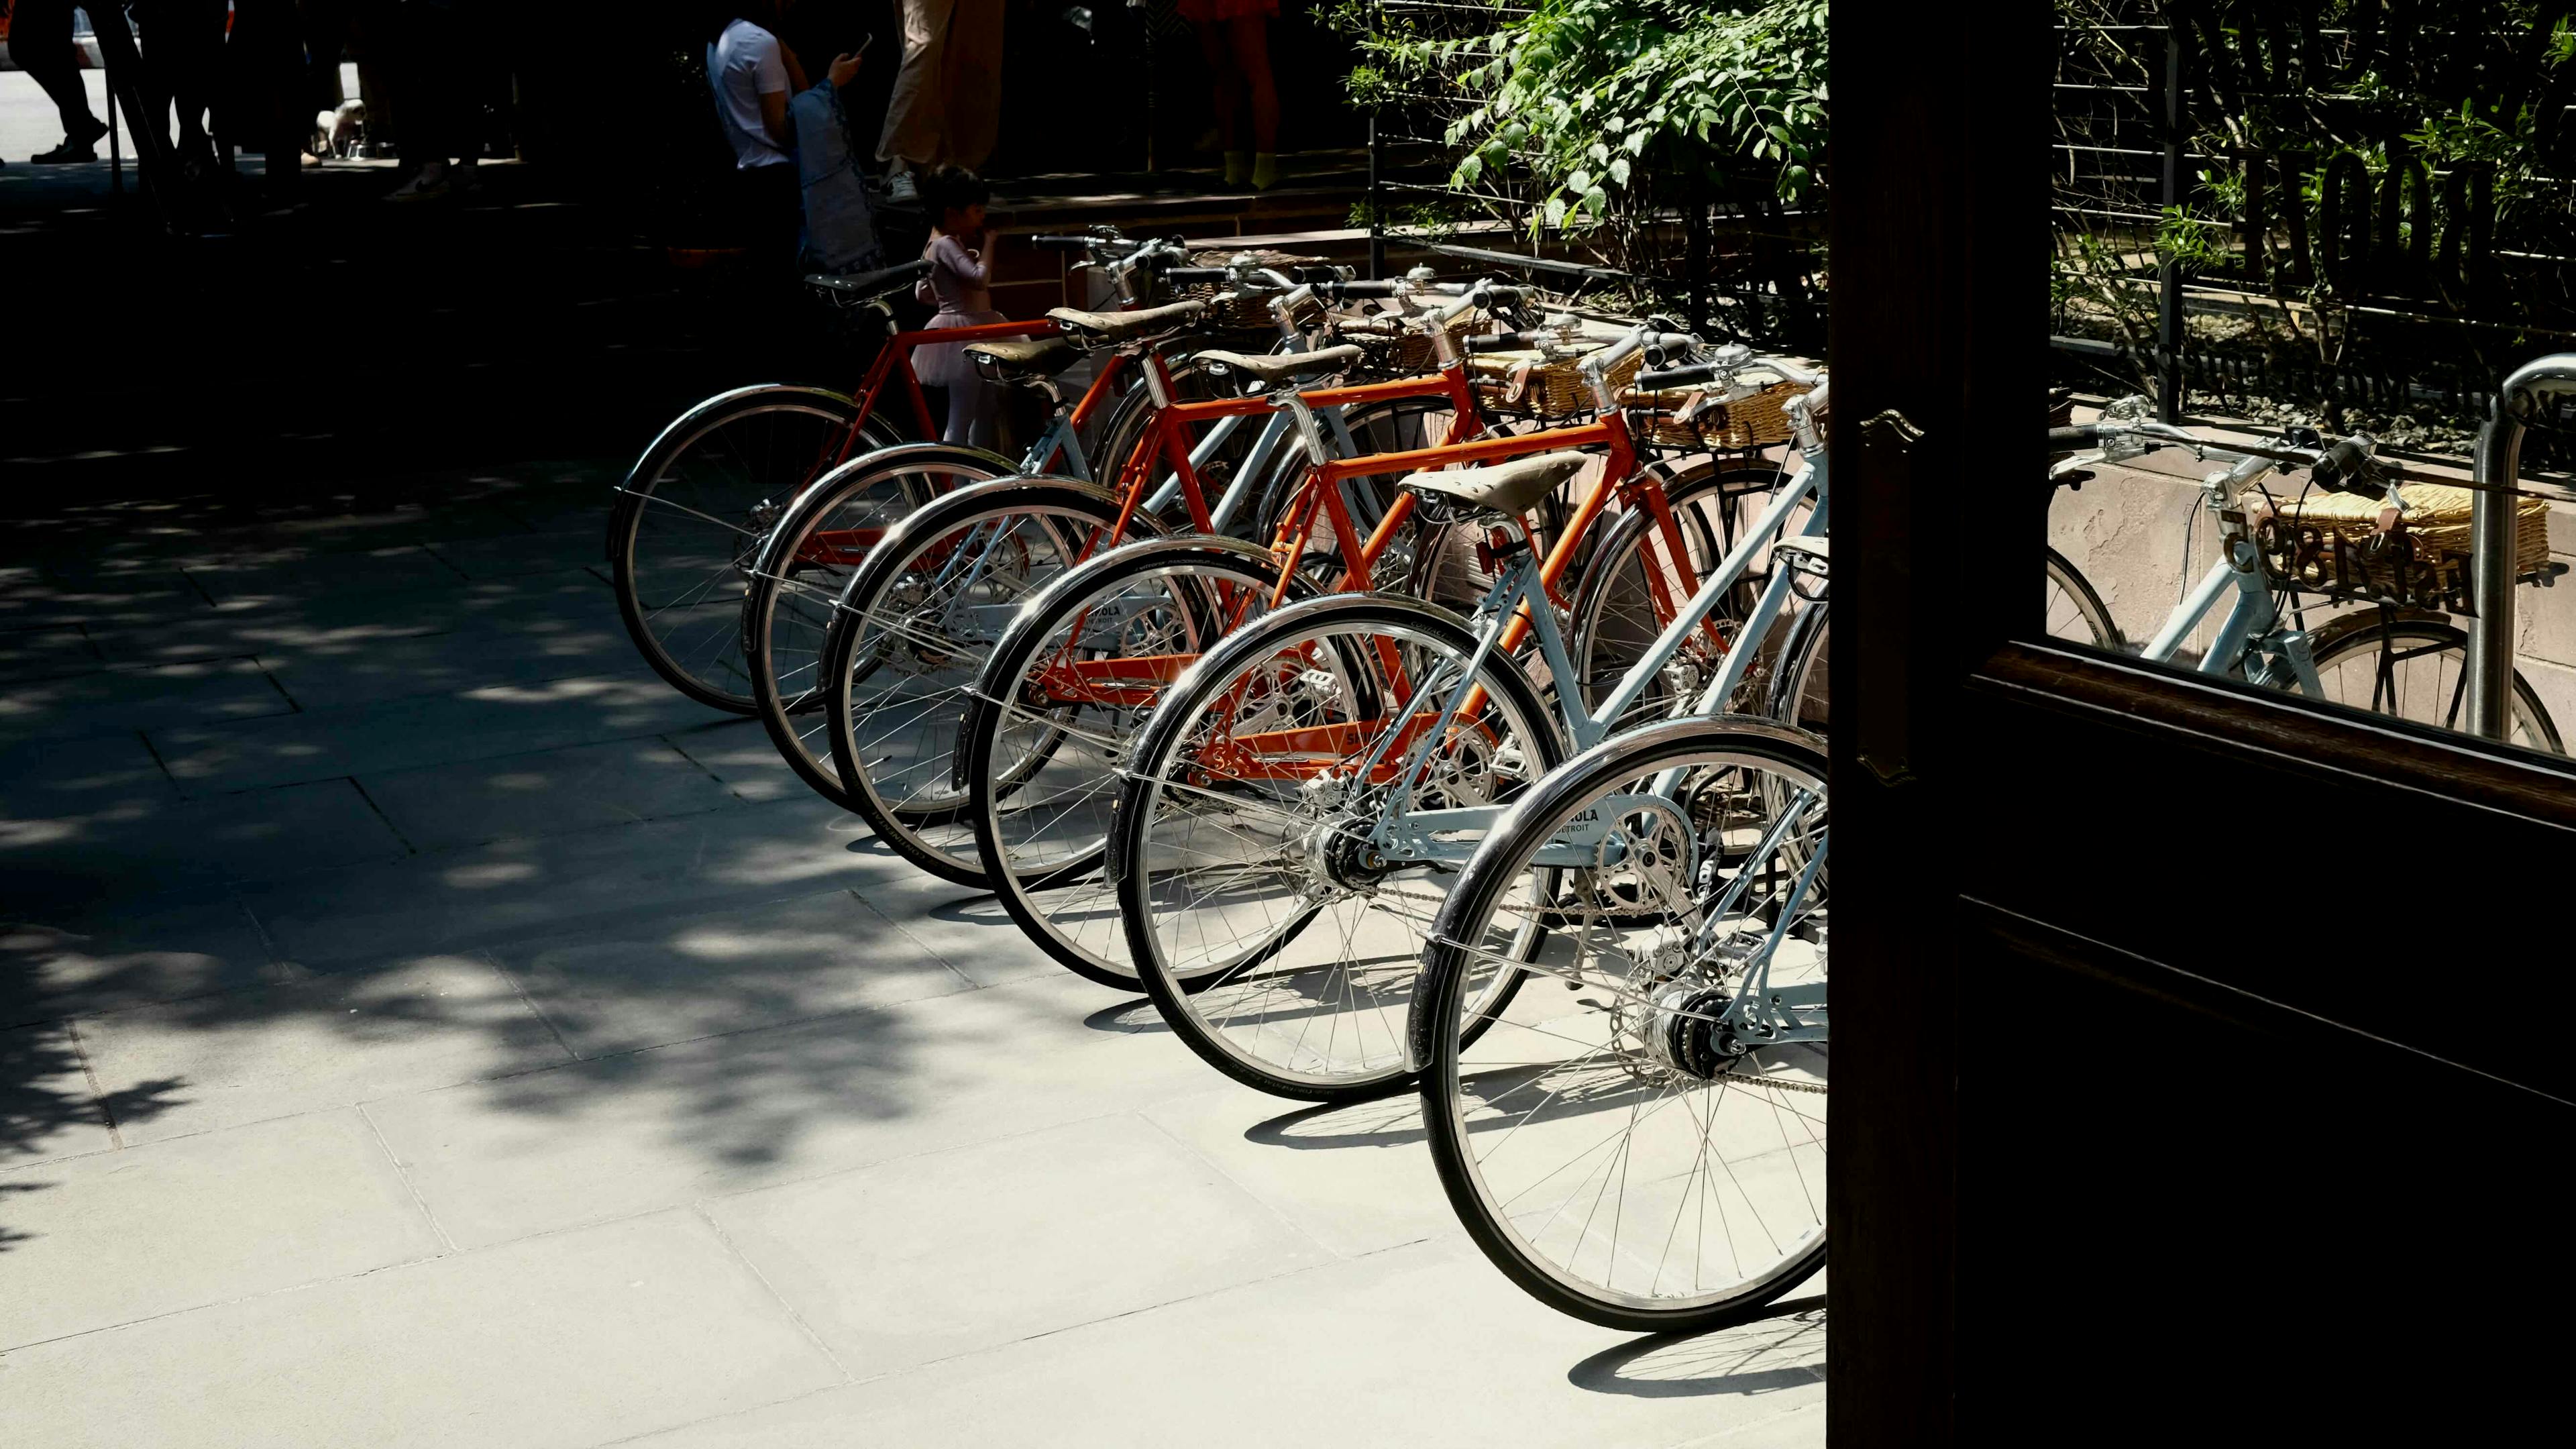 Some bikes in New York streets